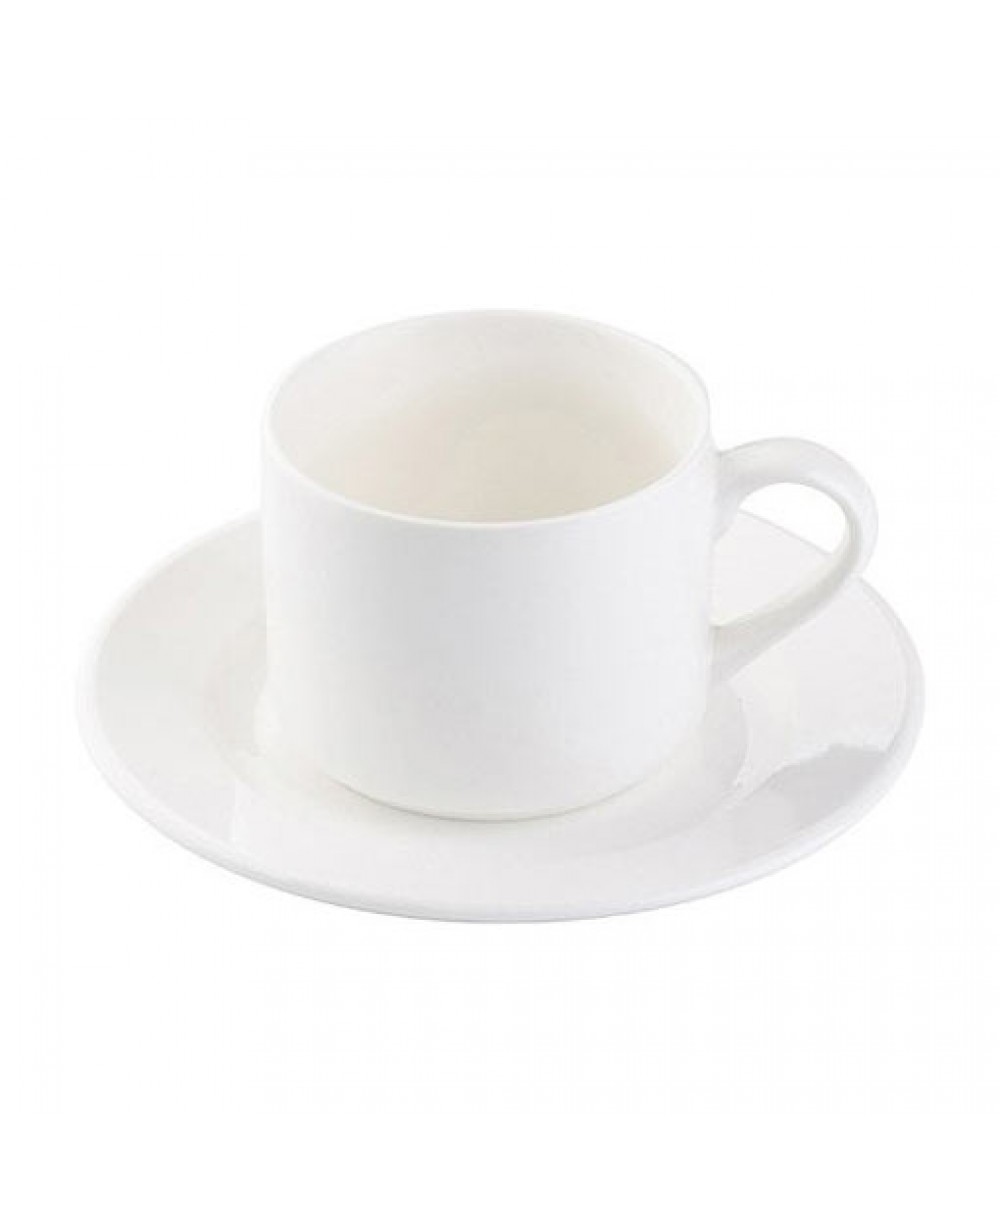 White Empty Tea Cup And Saucer With Simple Pattern Isolated On